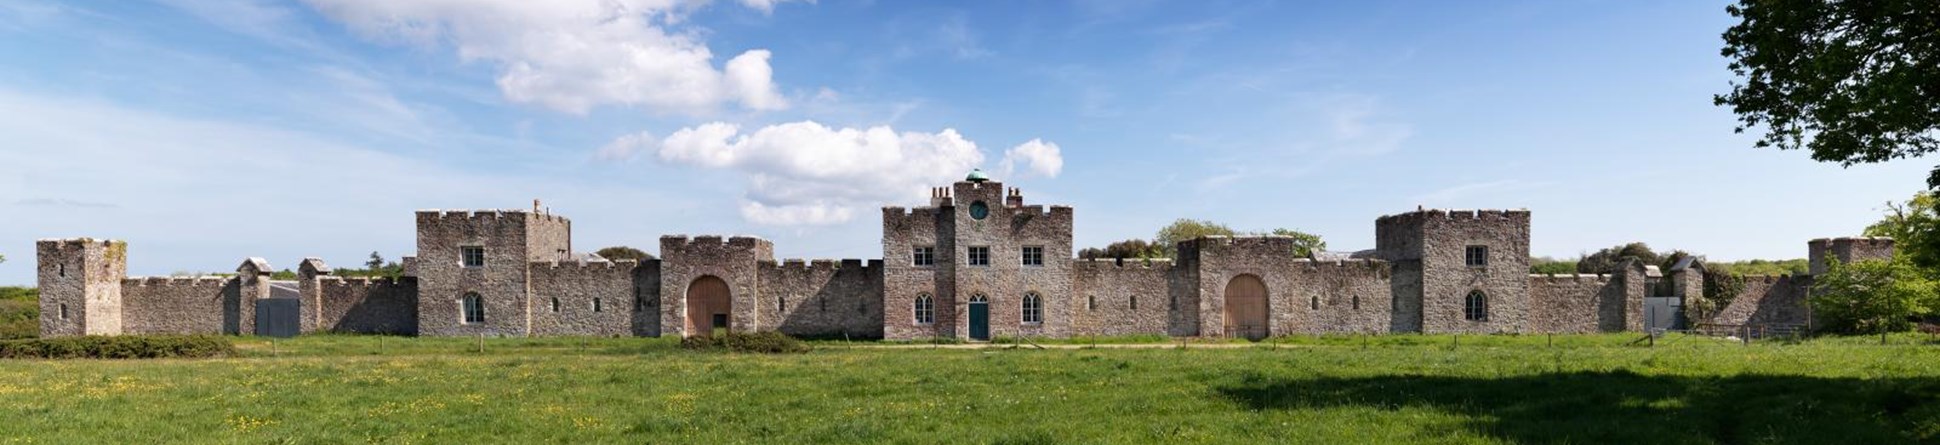 A large castle, with crenelated walls and towers.